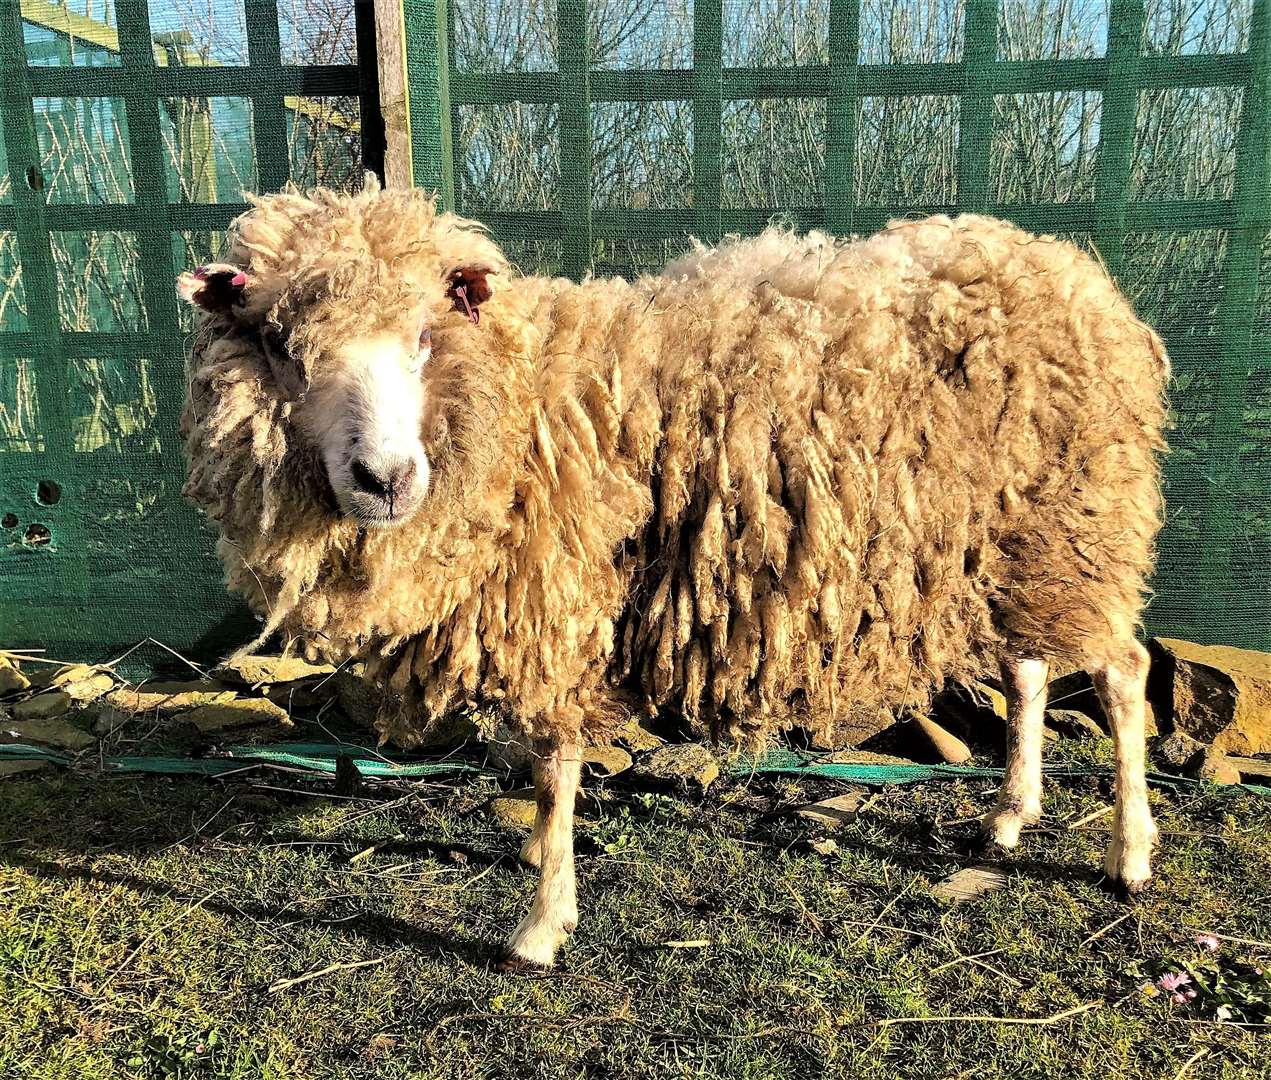 Ray is a Shetland sheep and is believed to have been born blind. Picture: Puffin Croft